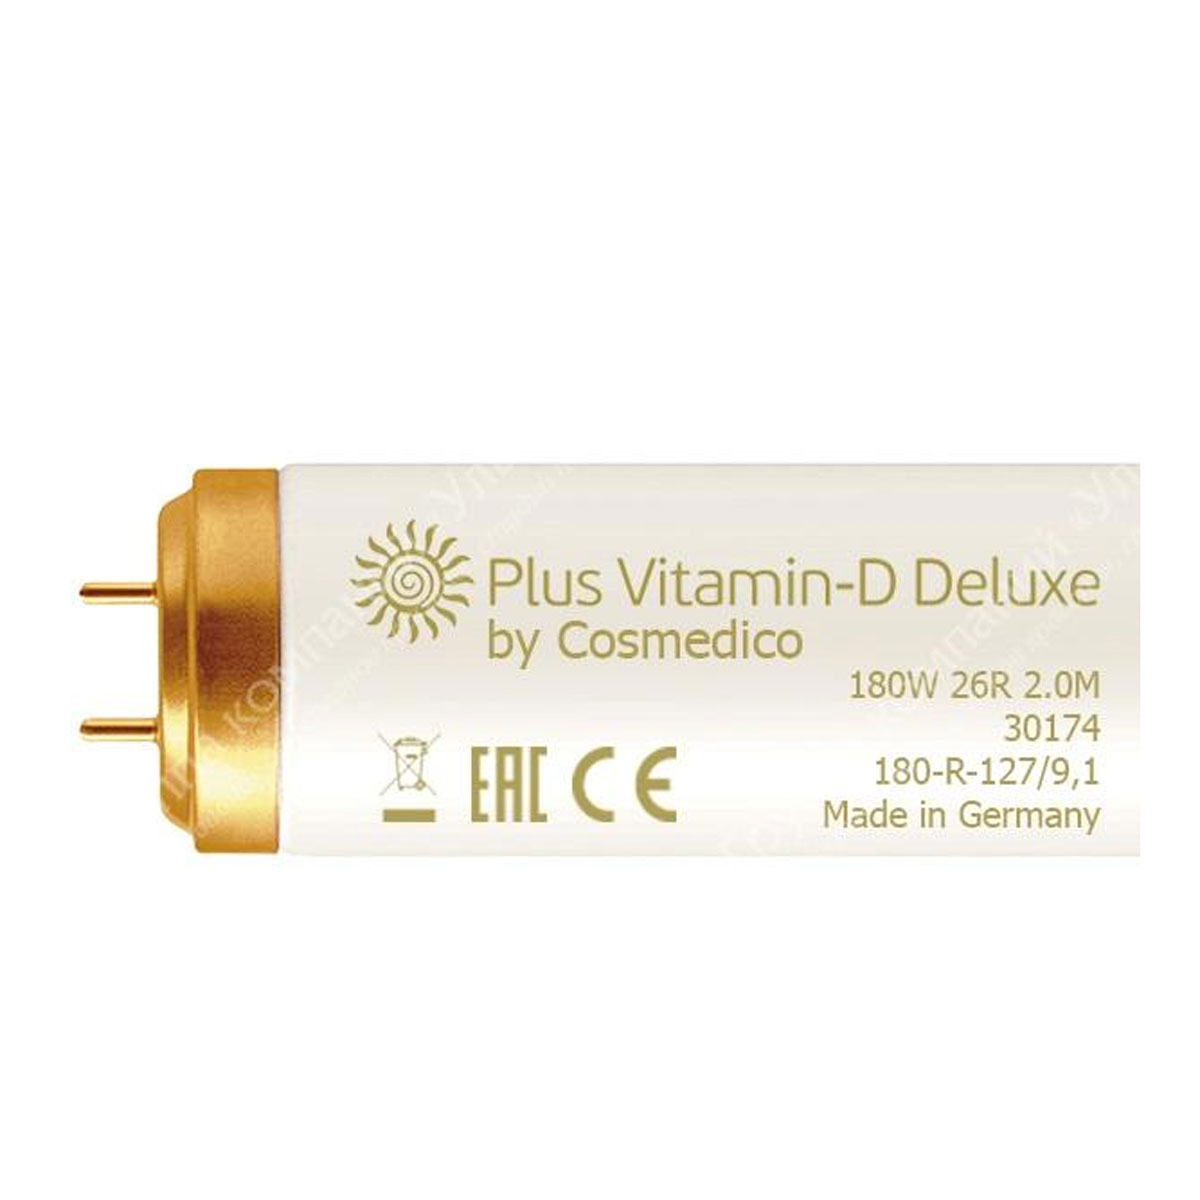 Plus Vitamin-D Deluxe 36R 160W by Cosmedico